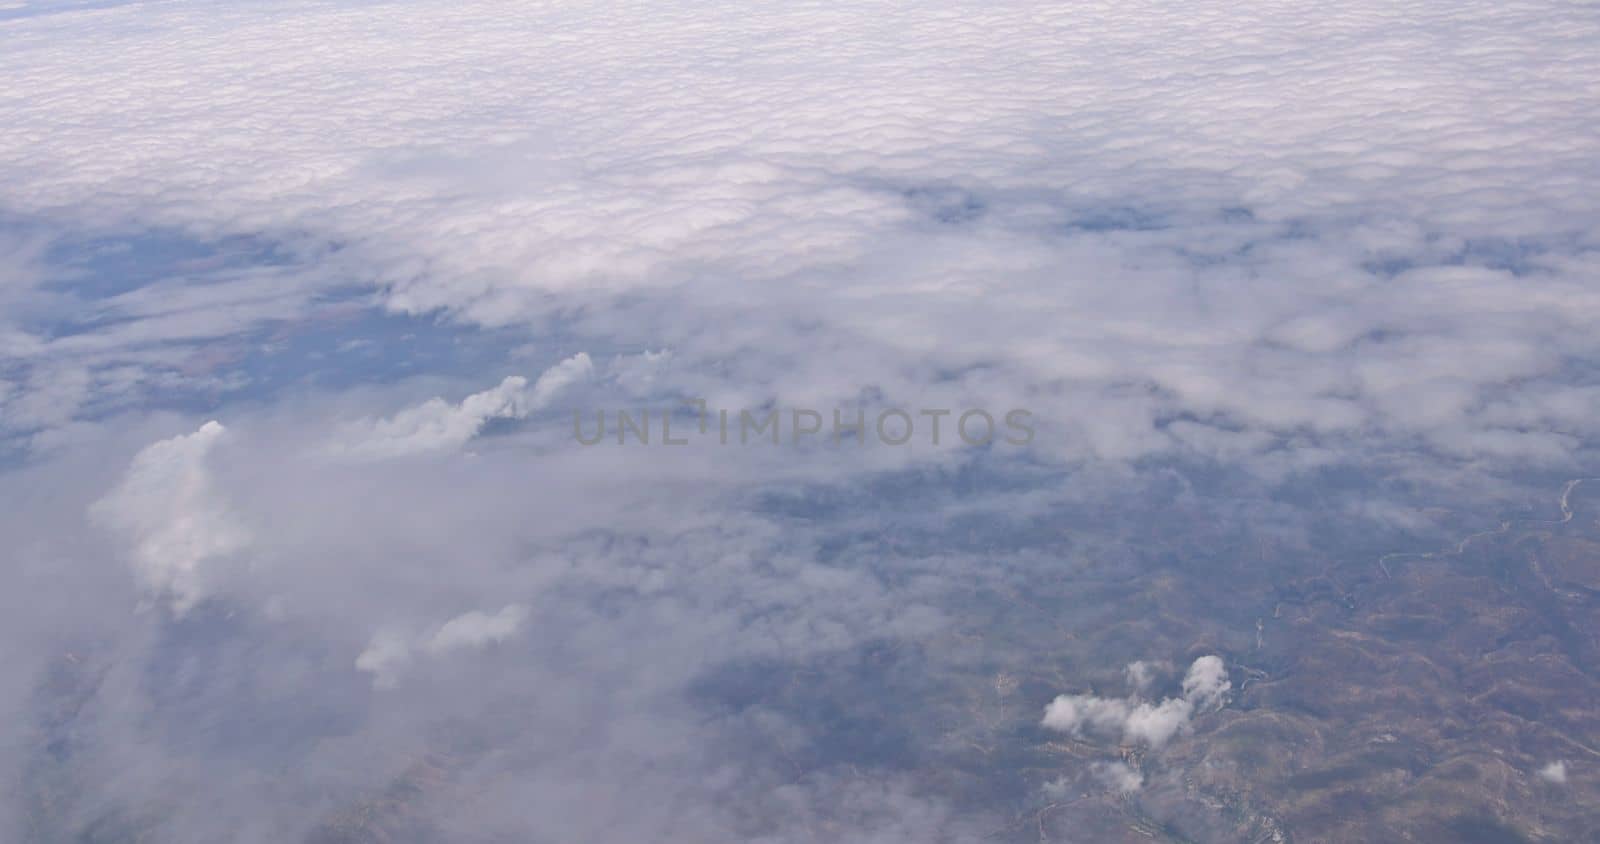 It is beautiful natural landscape view of land from an airplane window with white clouds against blue skies